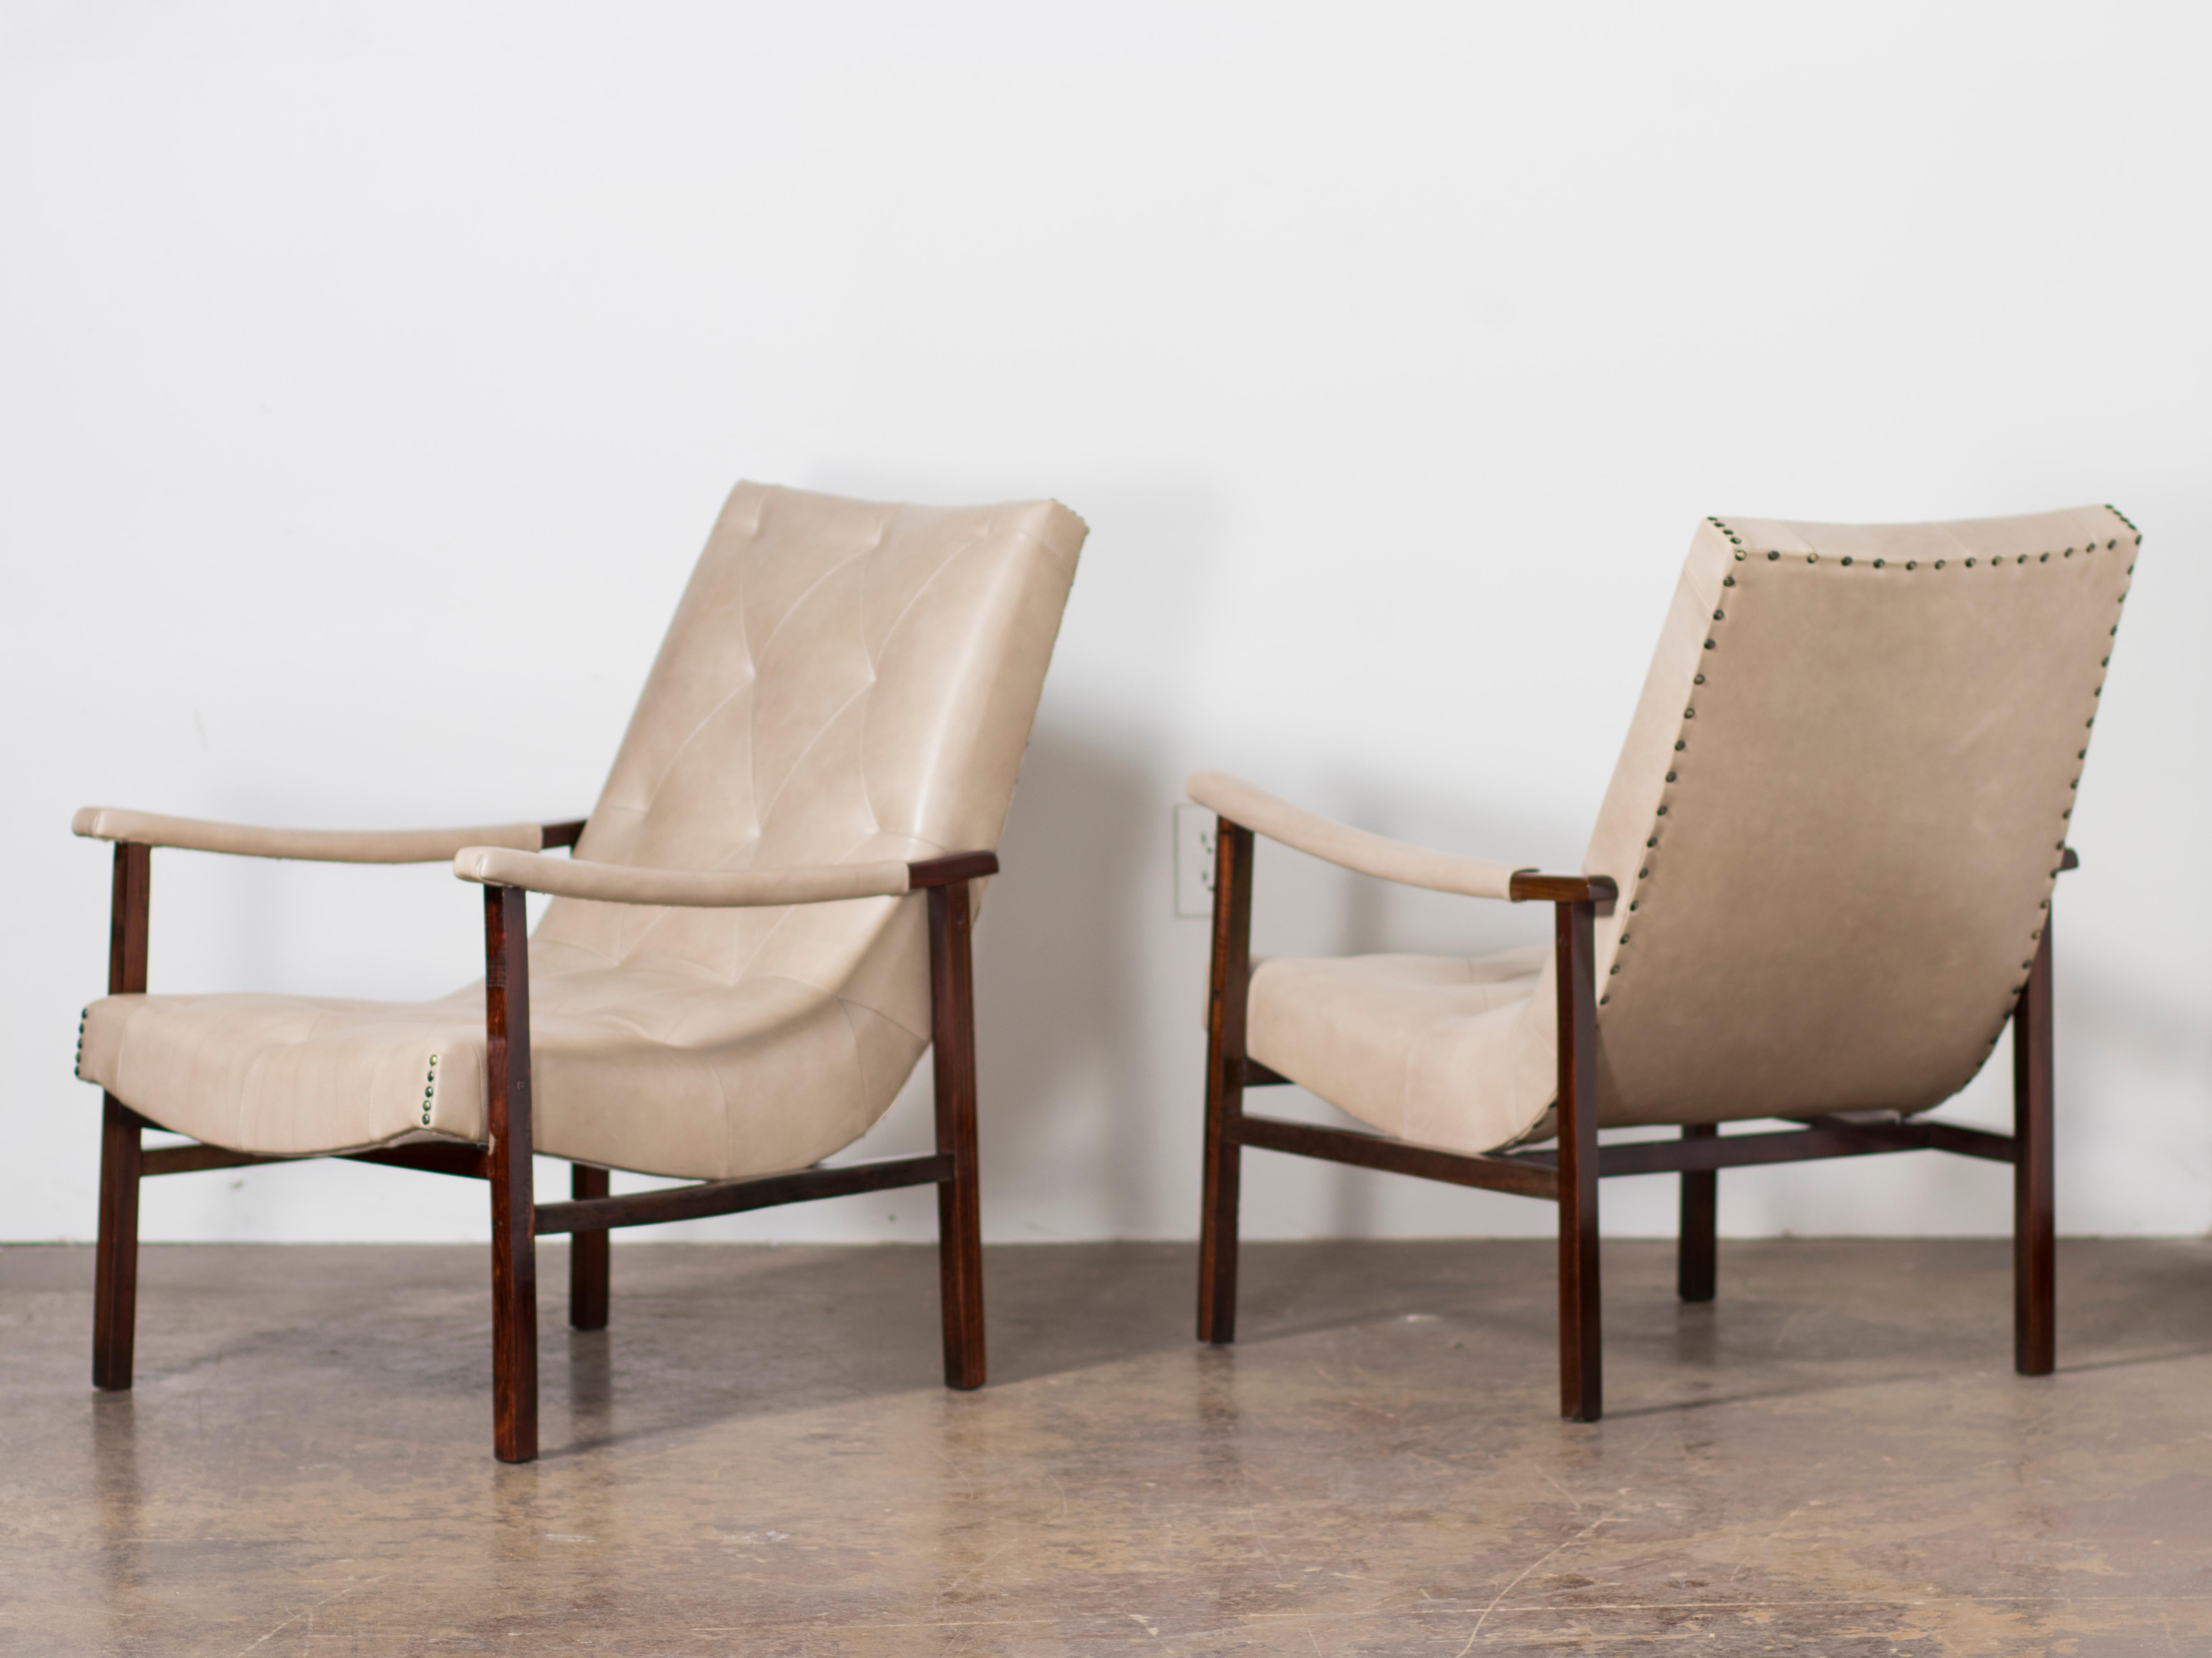 Designed by Gelli, a pair of modern Brazilian armchairs, rosewood, and leather.  Brazil, circa the 1950s. 

Pair of armchairs made in Brazilian Rosewood (Jacaranda) and recently reupholstered in a high-quality beige pattern leather by the